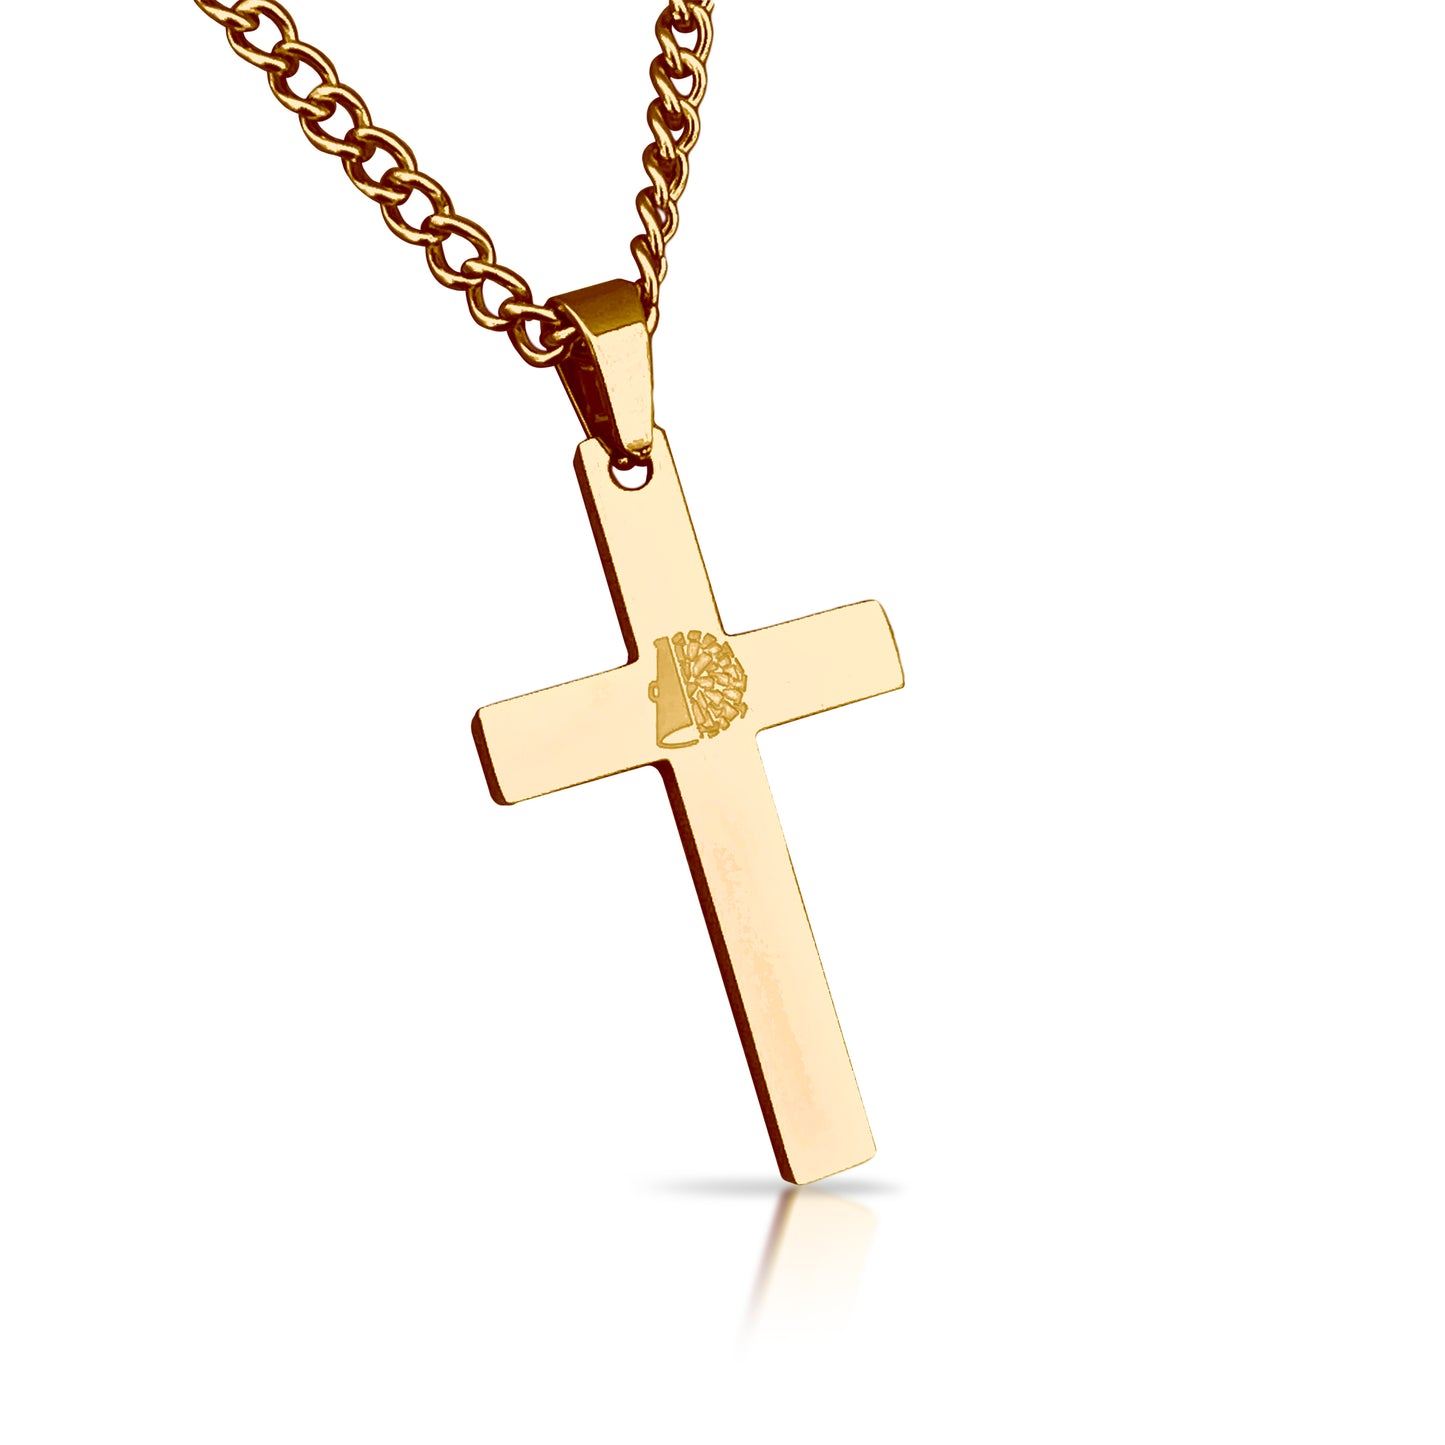 Cheerleading Cross Pendant With Chain Necklace - 14K Gold Plated Stainless Steel